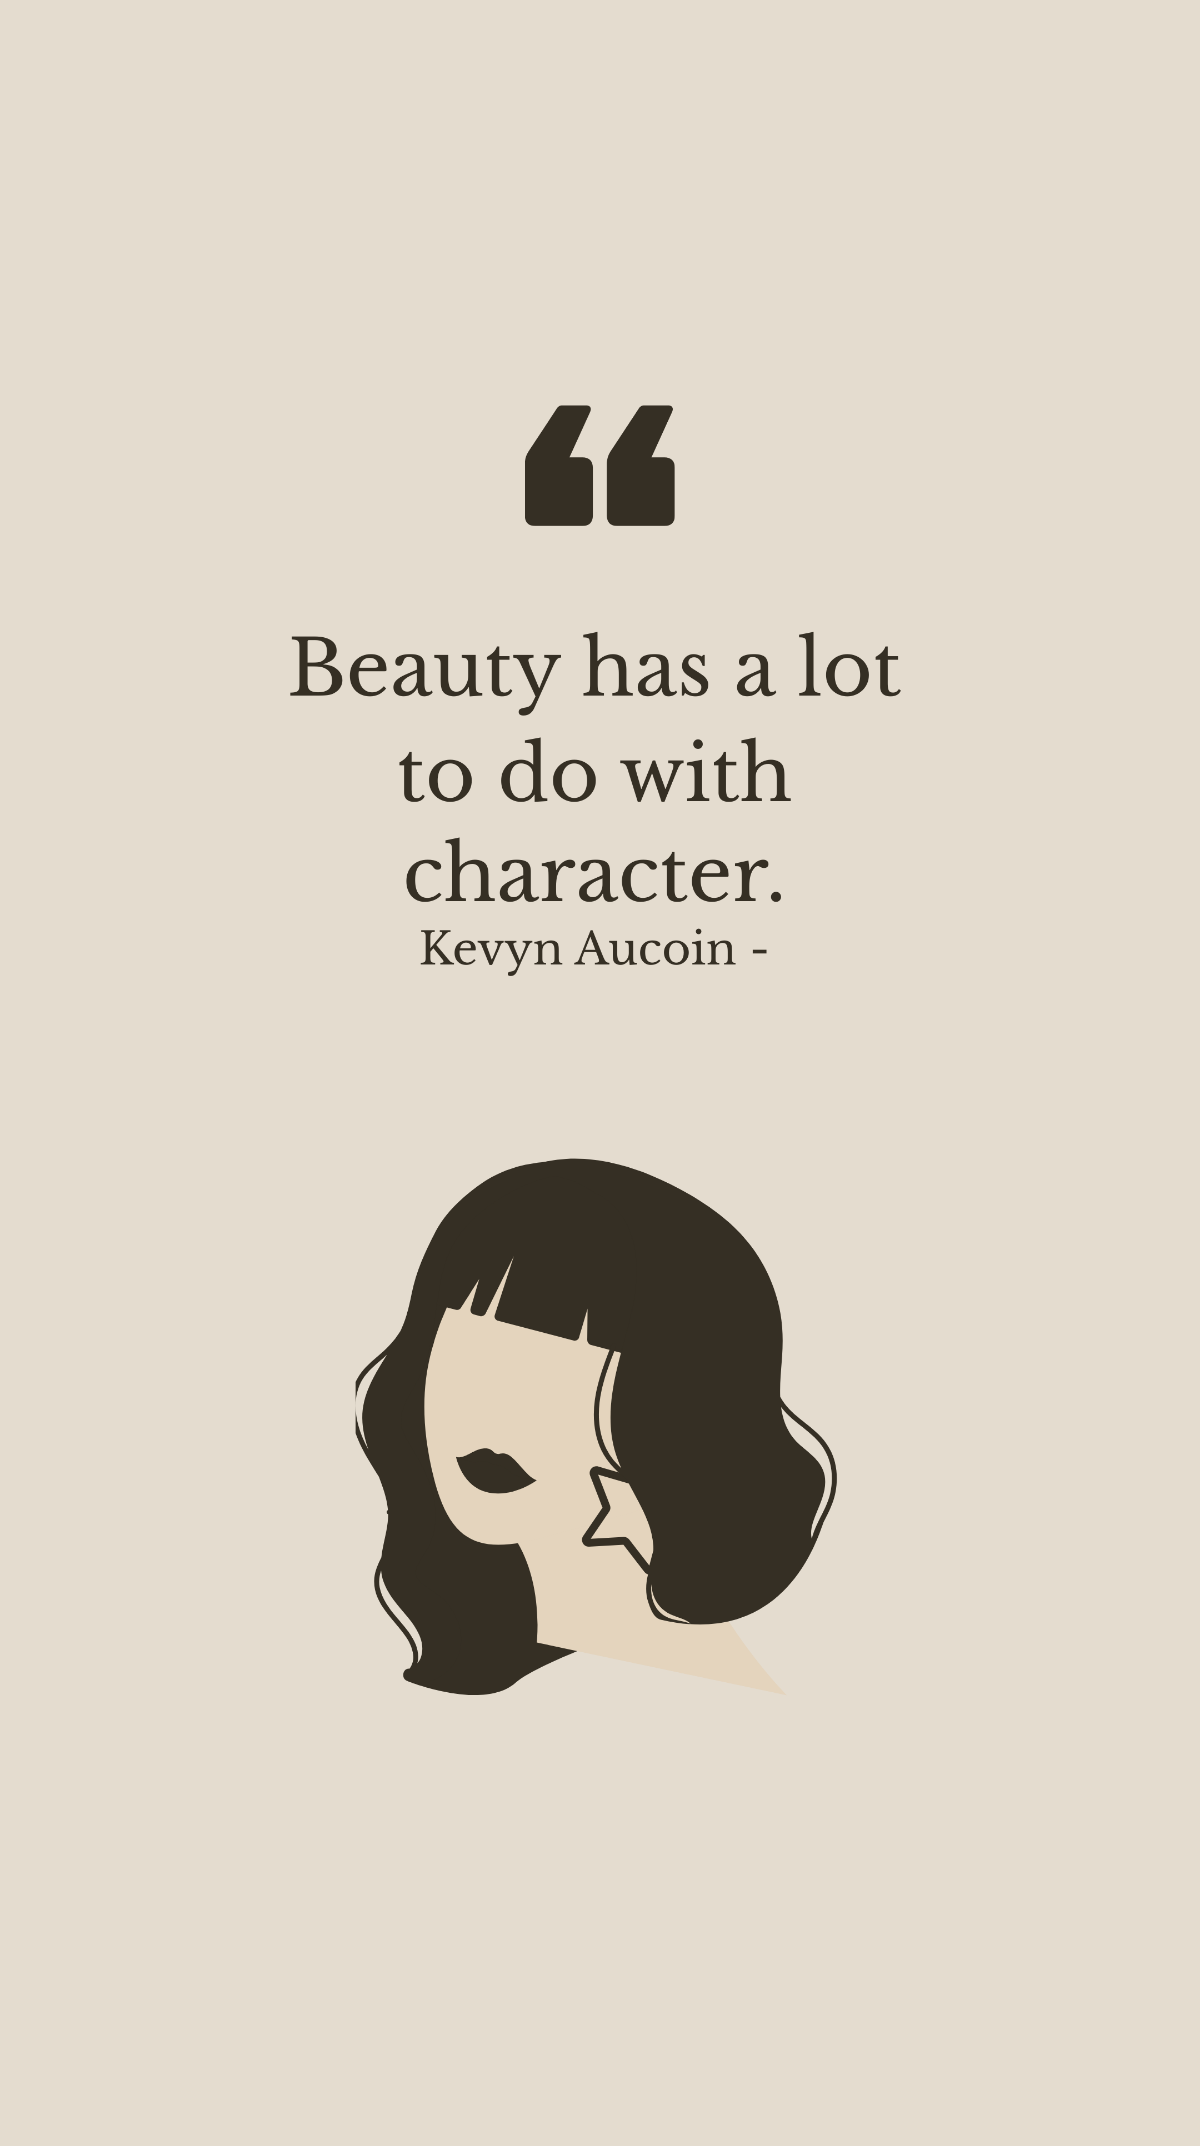 Free Kevyn Aucoin - Beauty has a lot to do with character. Template